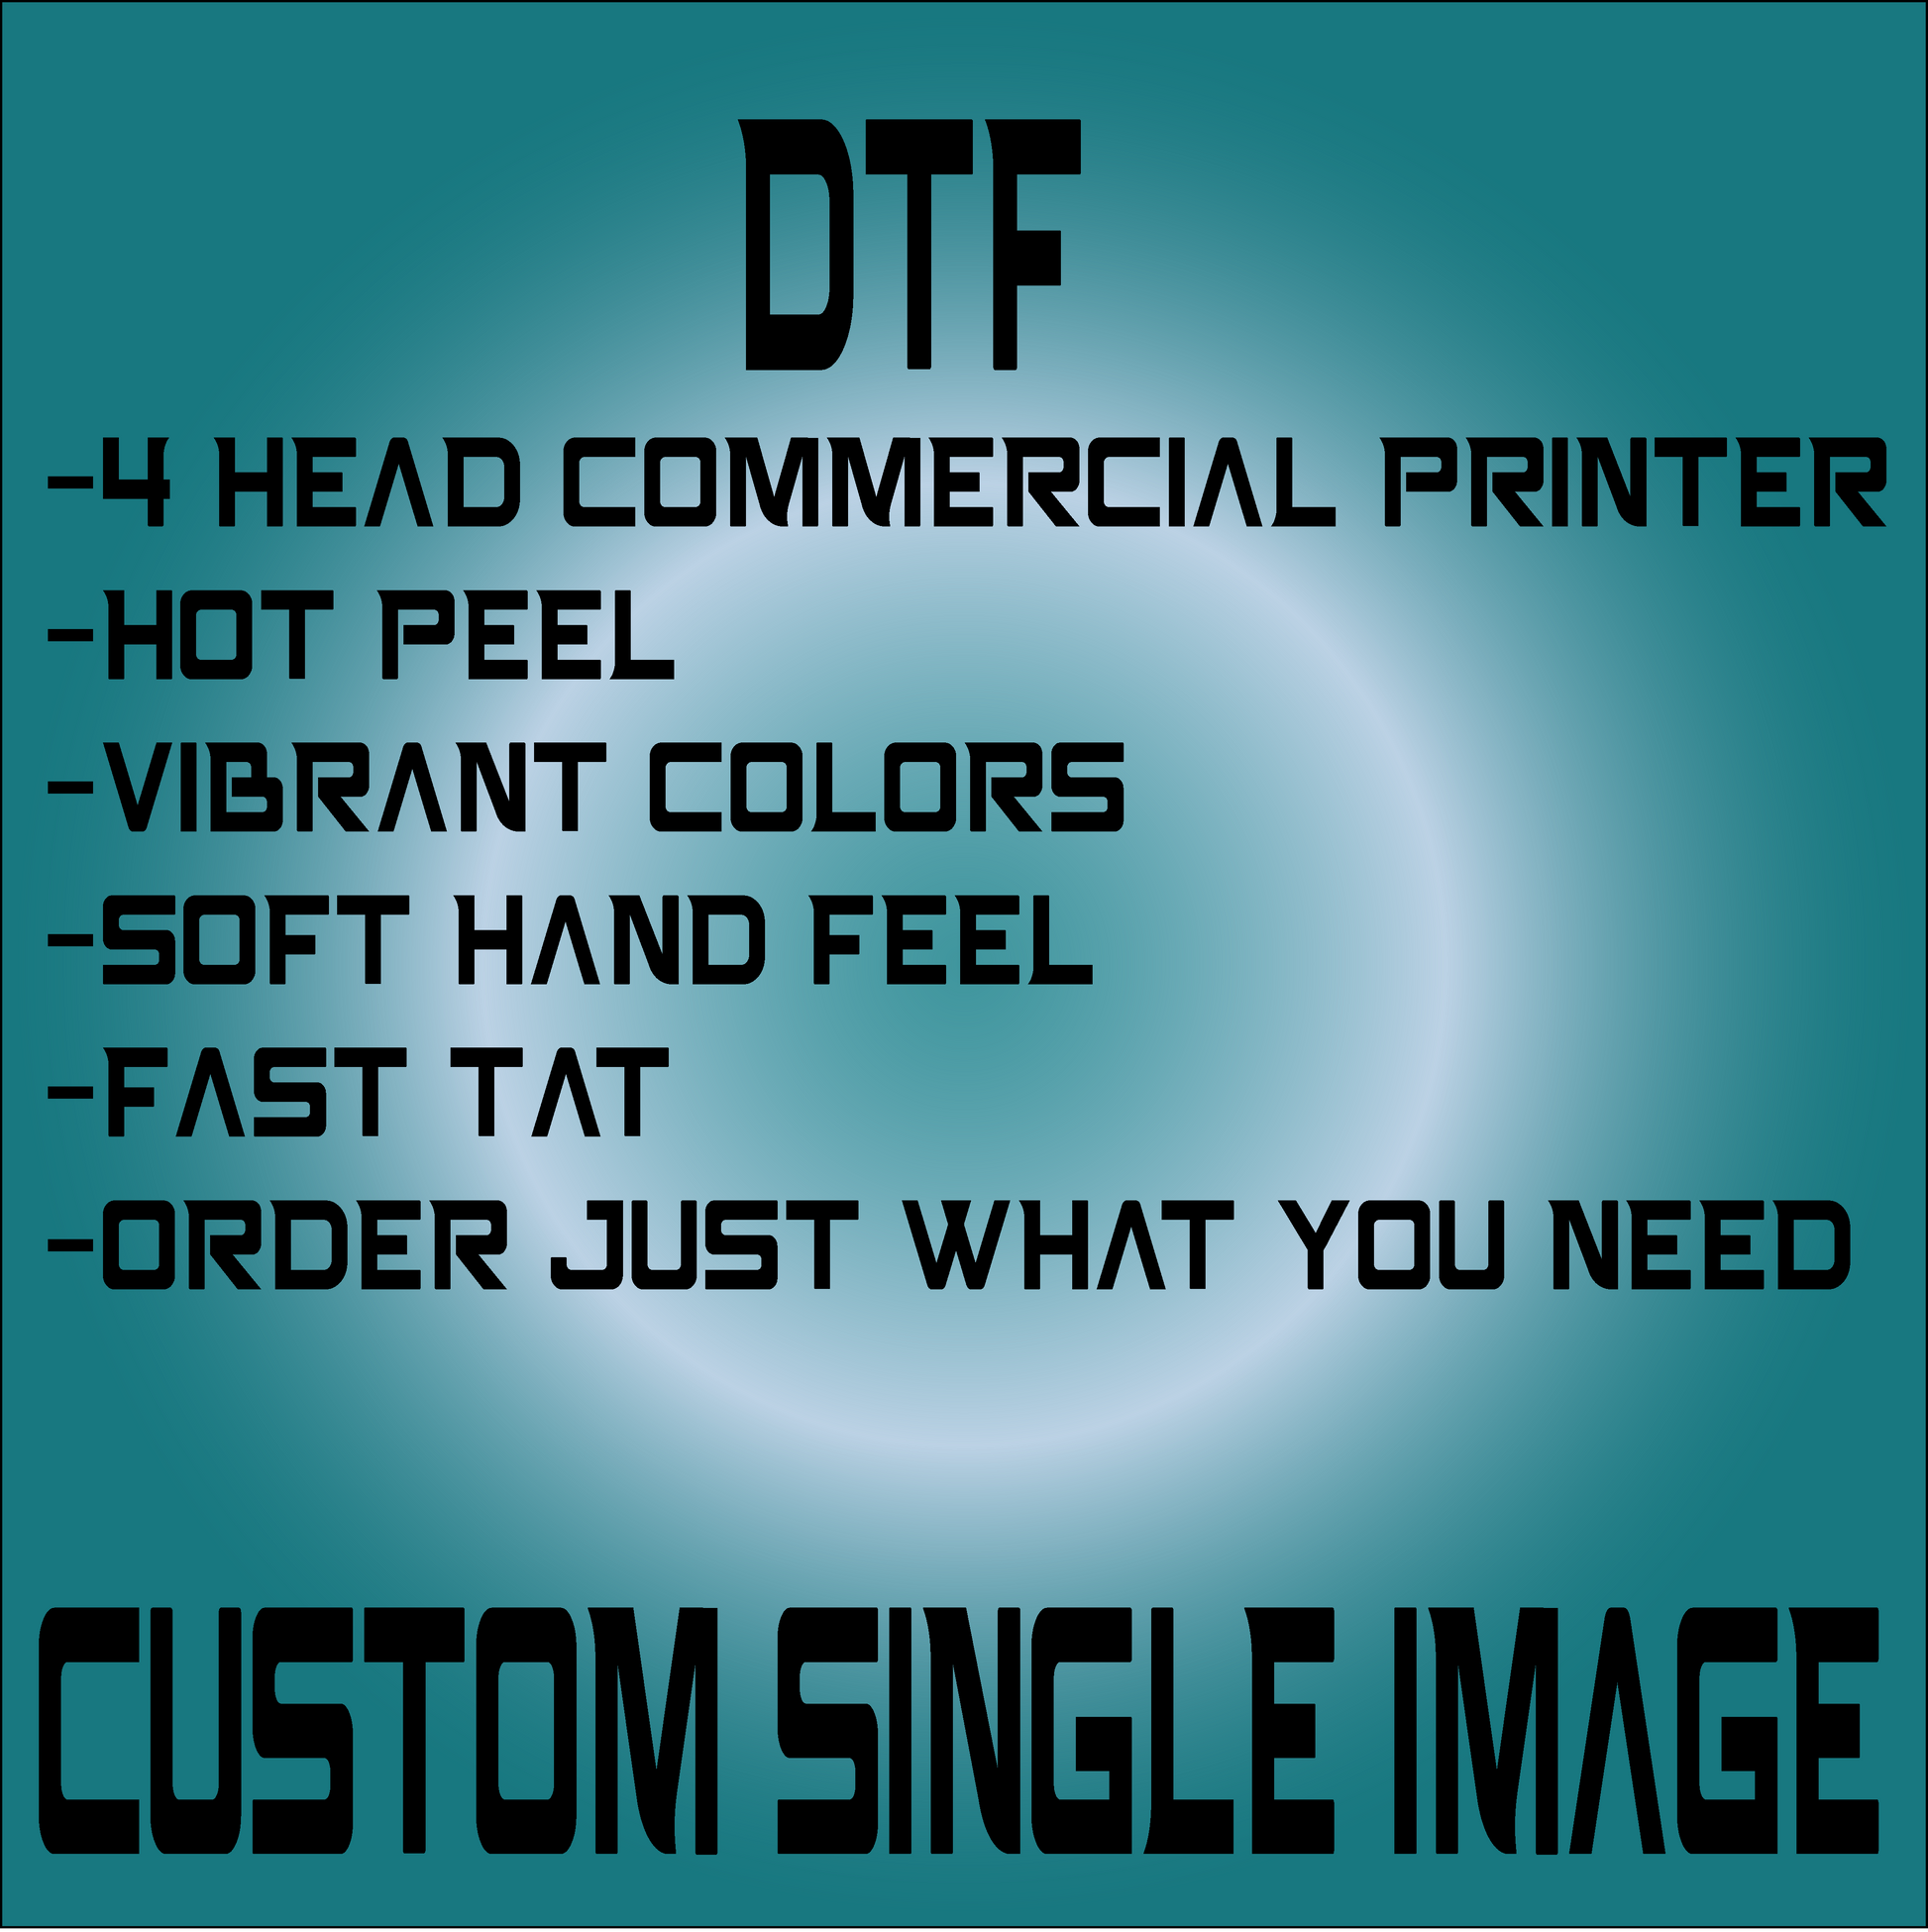 JUST IRON, AND DONE. Custom Printed DTF Transfers: iron press